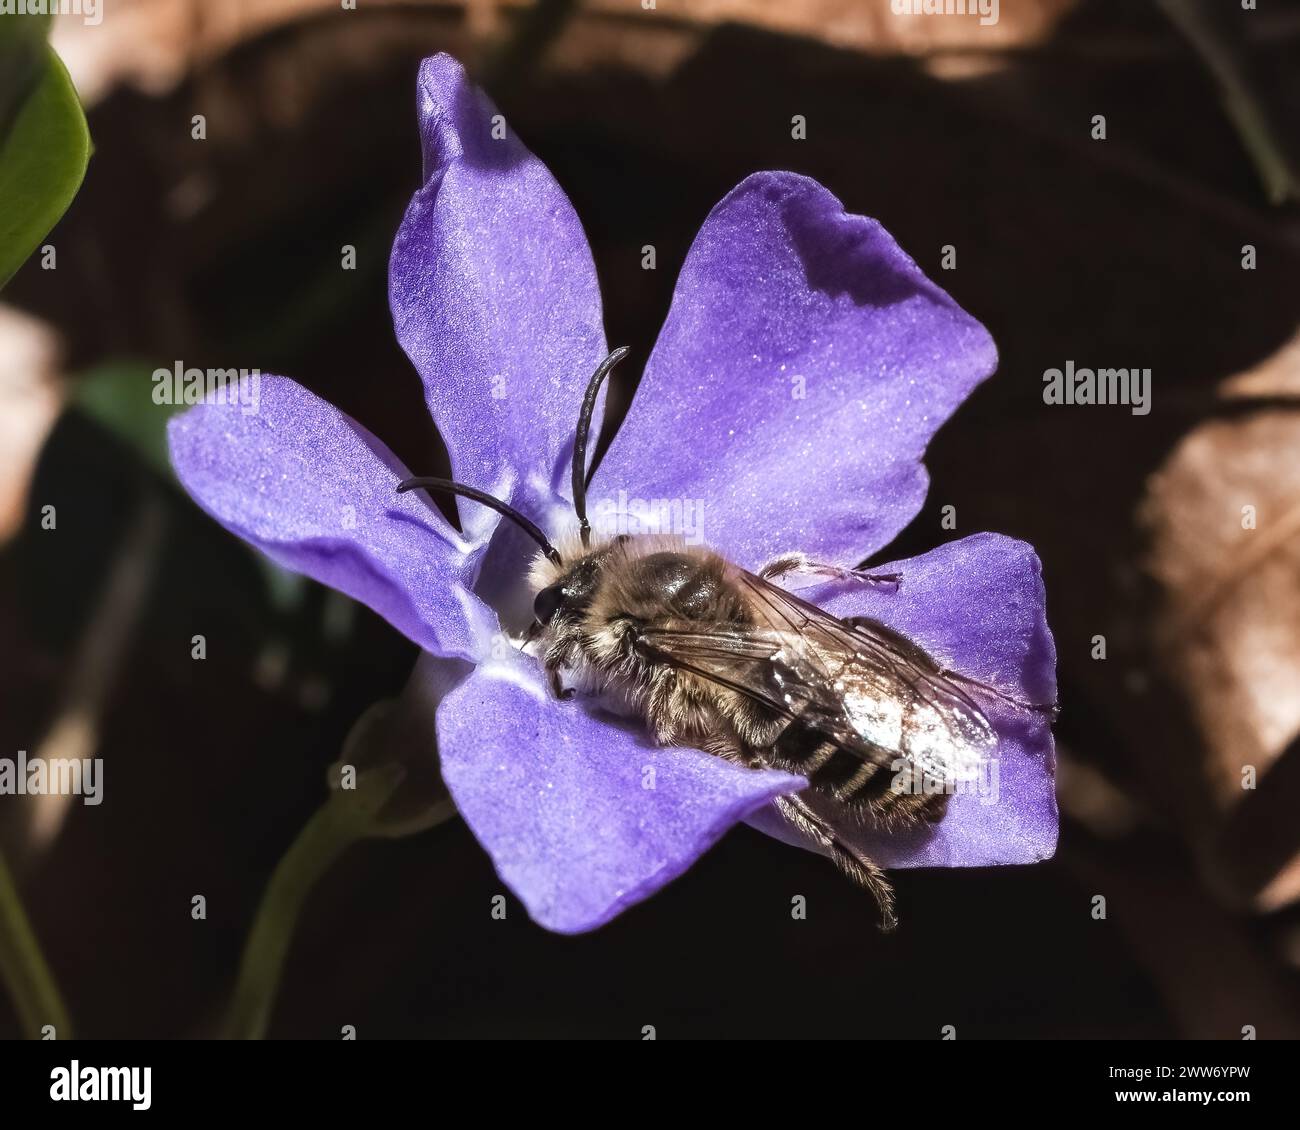 A Colletes Cellophane Polyester Bee retrieving nectar from a purple Periwinkle flower after it had just emerged from its underground nest. NY, USA Stock Photo